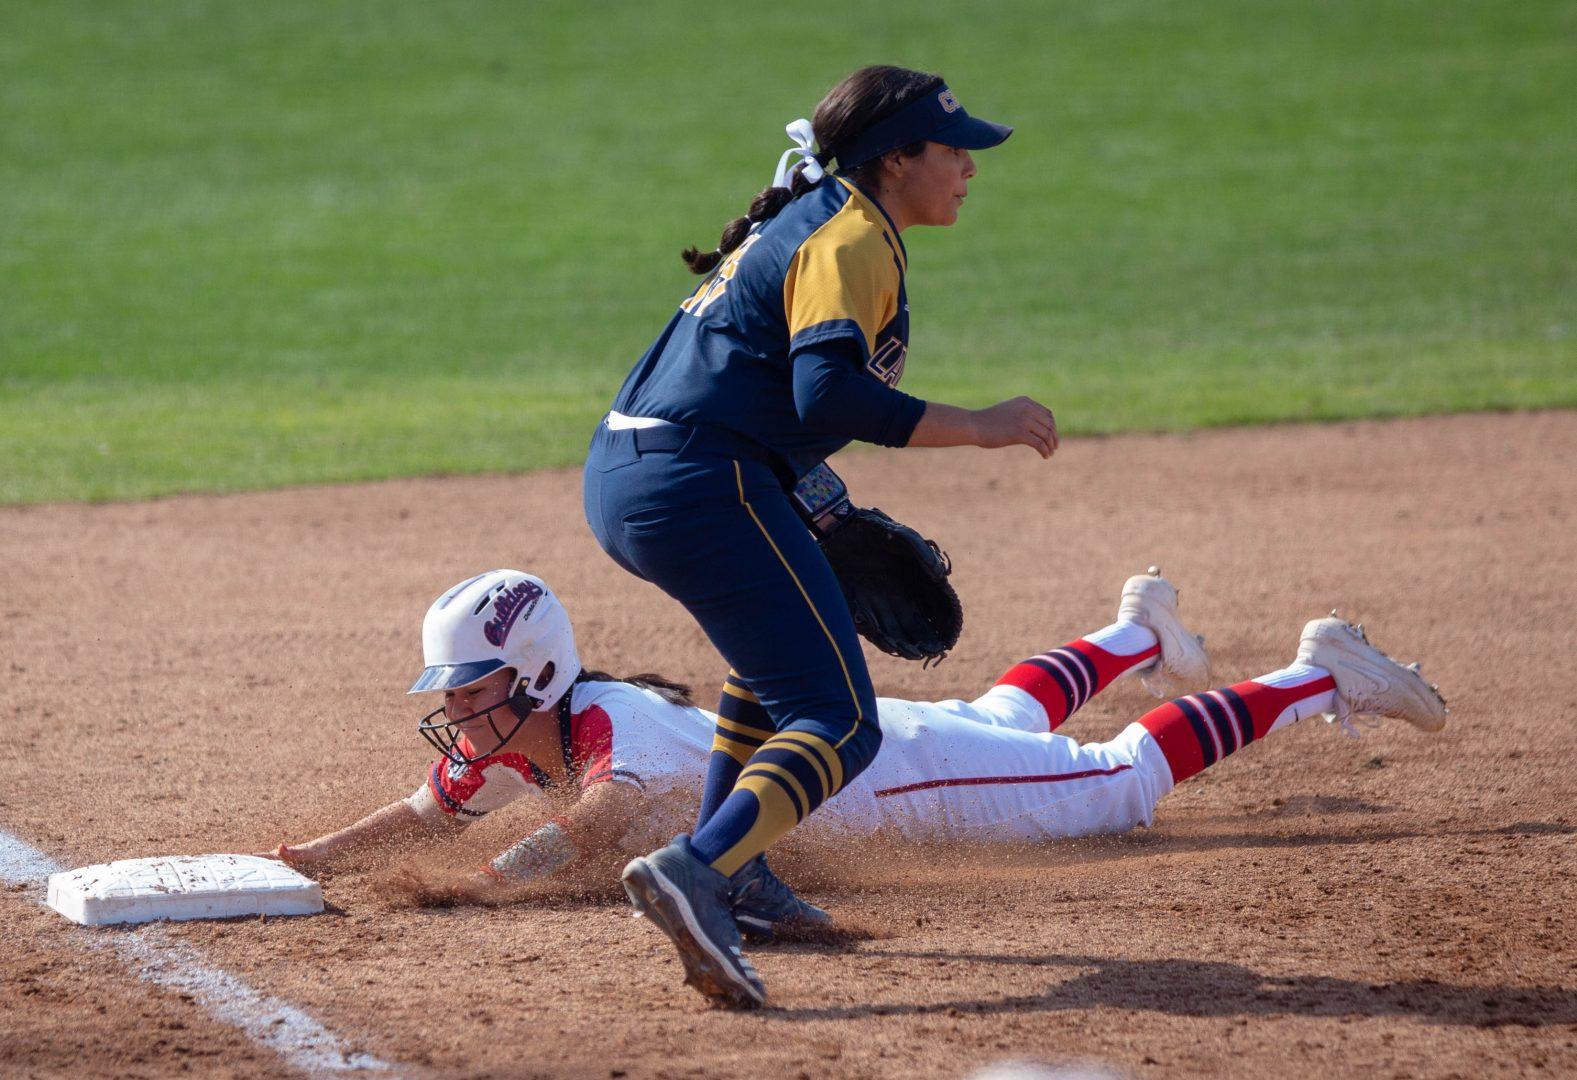 Fresno State’s Rachel Minogue slides to third base during the Bulldogs’ 6-4 victory over
California Baptist in part of the Bulldog Classic at Margie Wright Diamond on Sunday, March 10,
2019. (Jose Romo Jr./The Collegian).